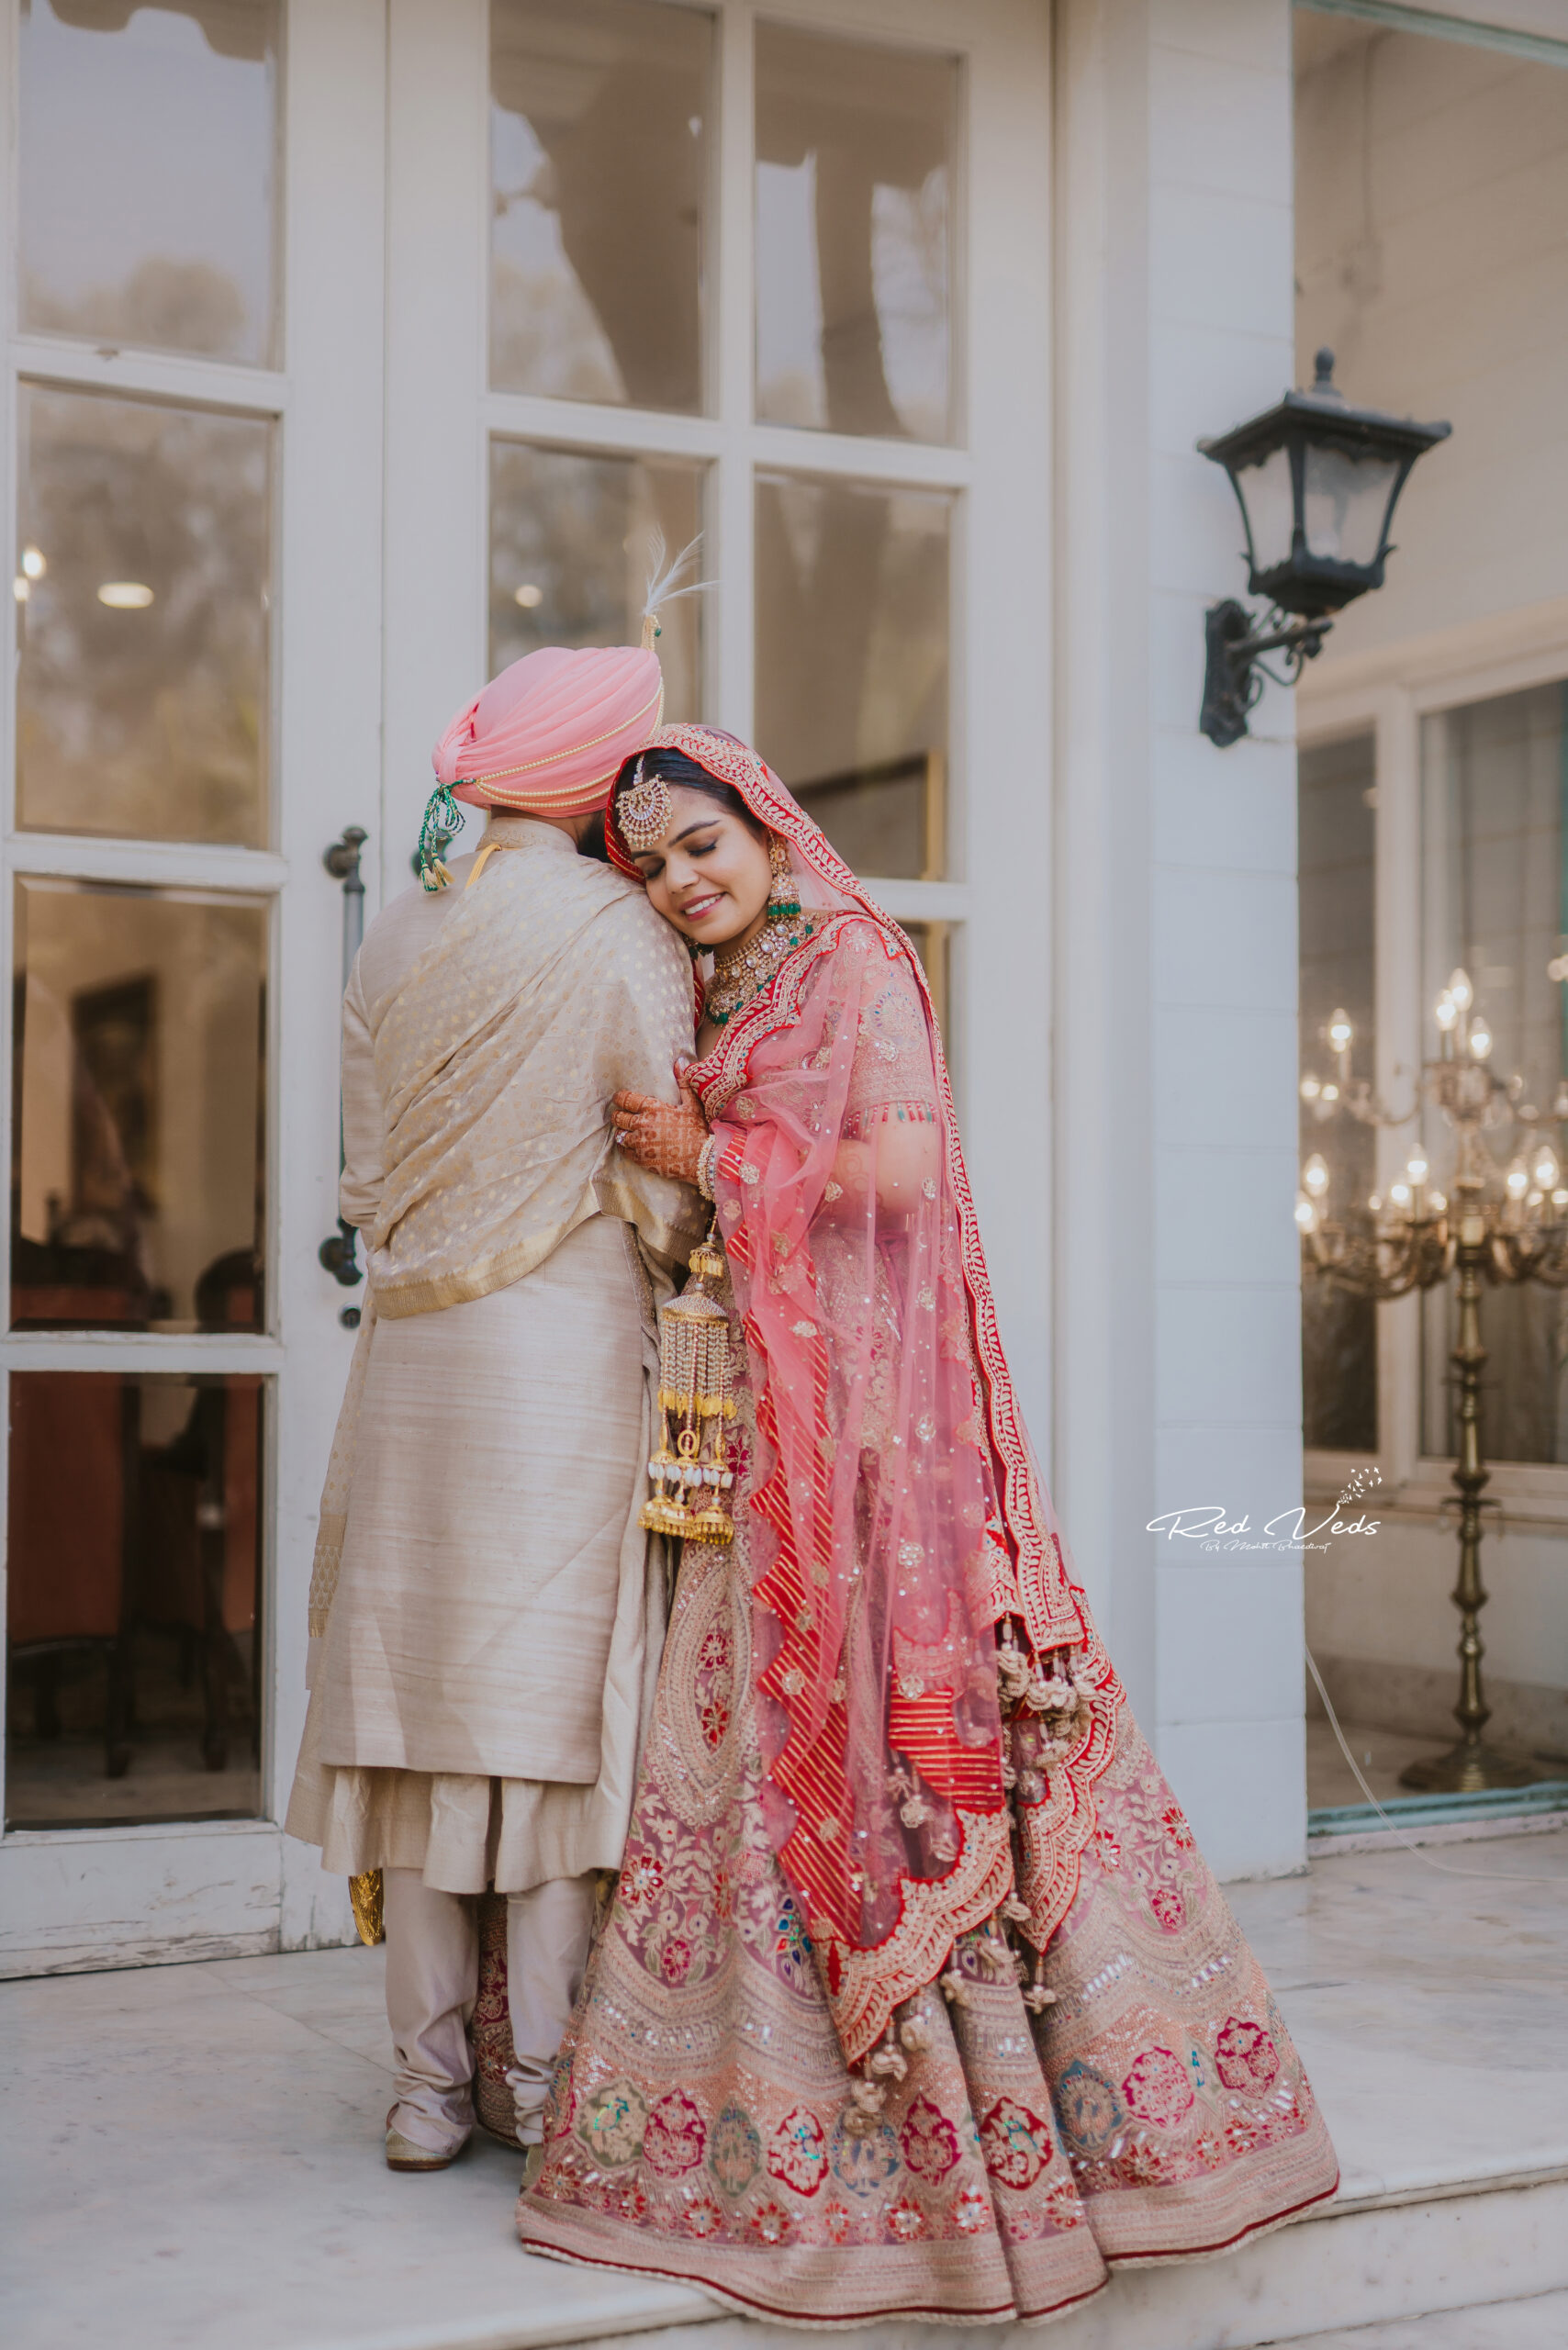 Dulha & Dulhan on Instagram: “This Couple ❤️ Photography by @fnfphotowork”  | Bridal pictures, Nice dresses, Bride